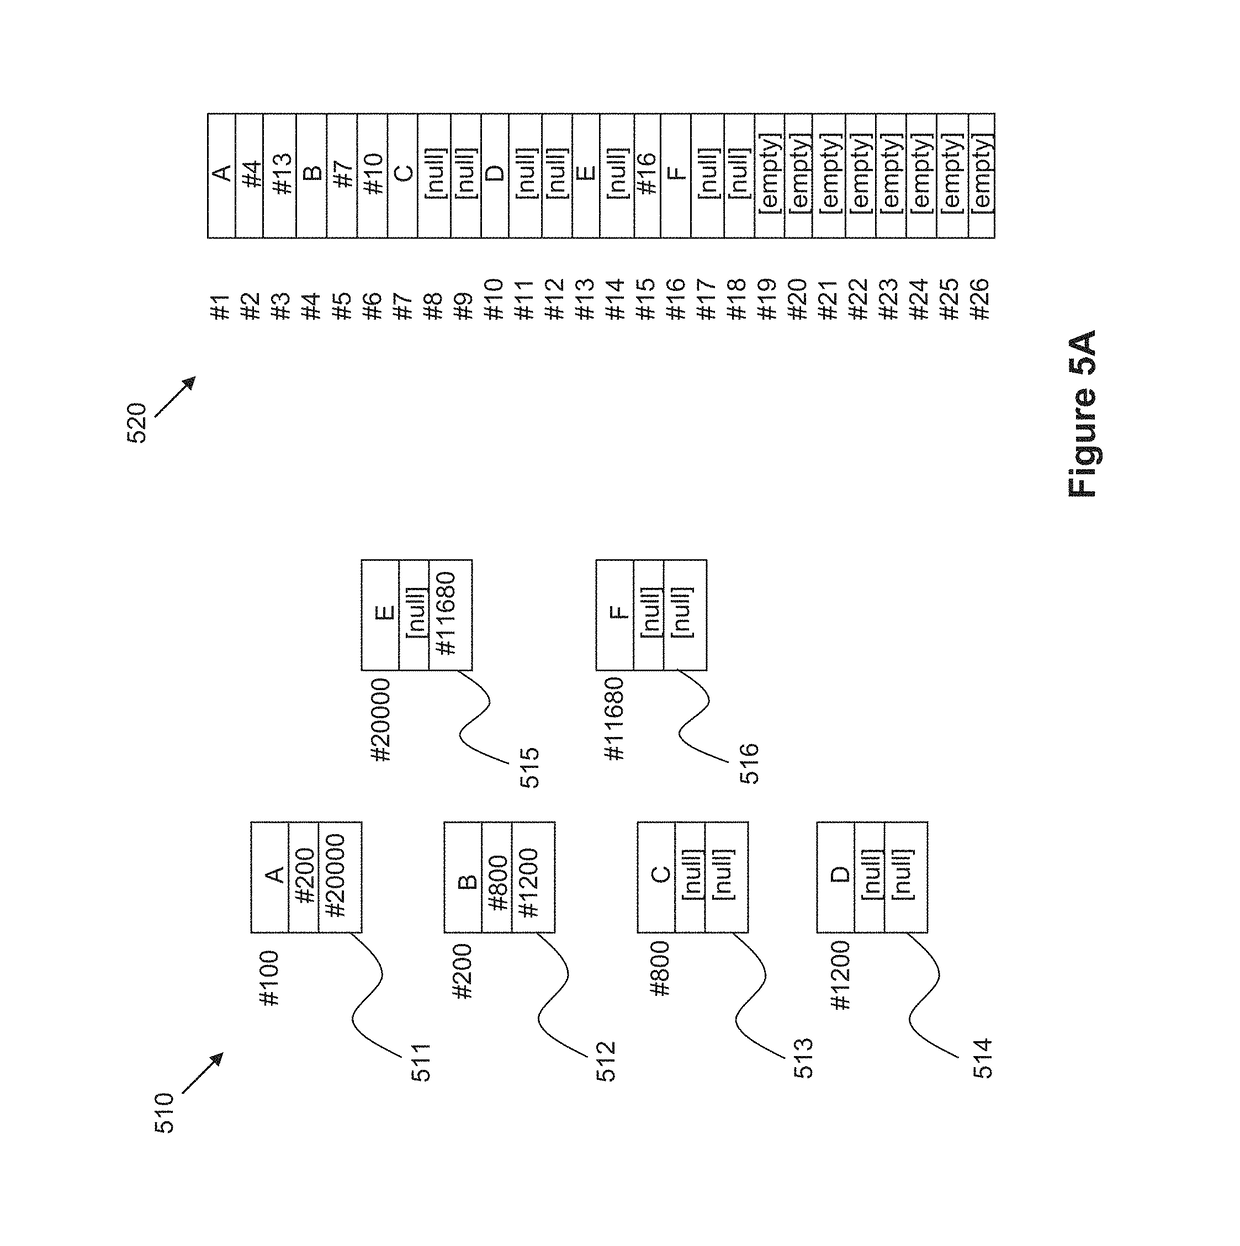 Tree structure serialization and deserialization systems and methods